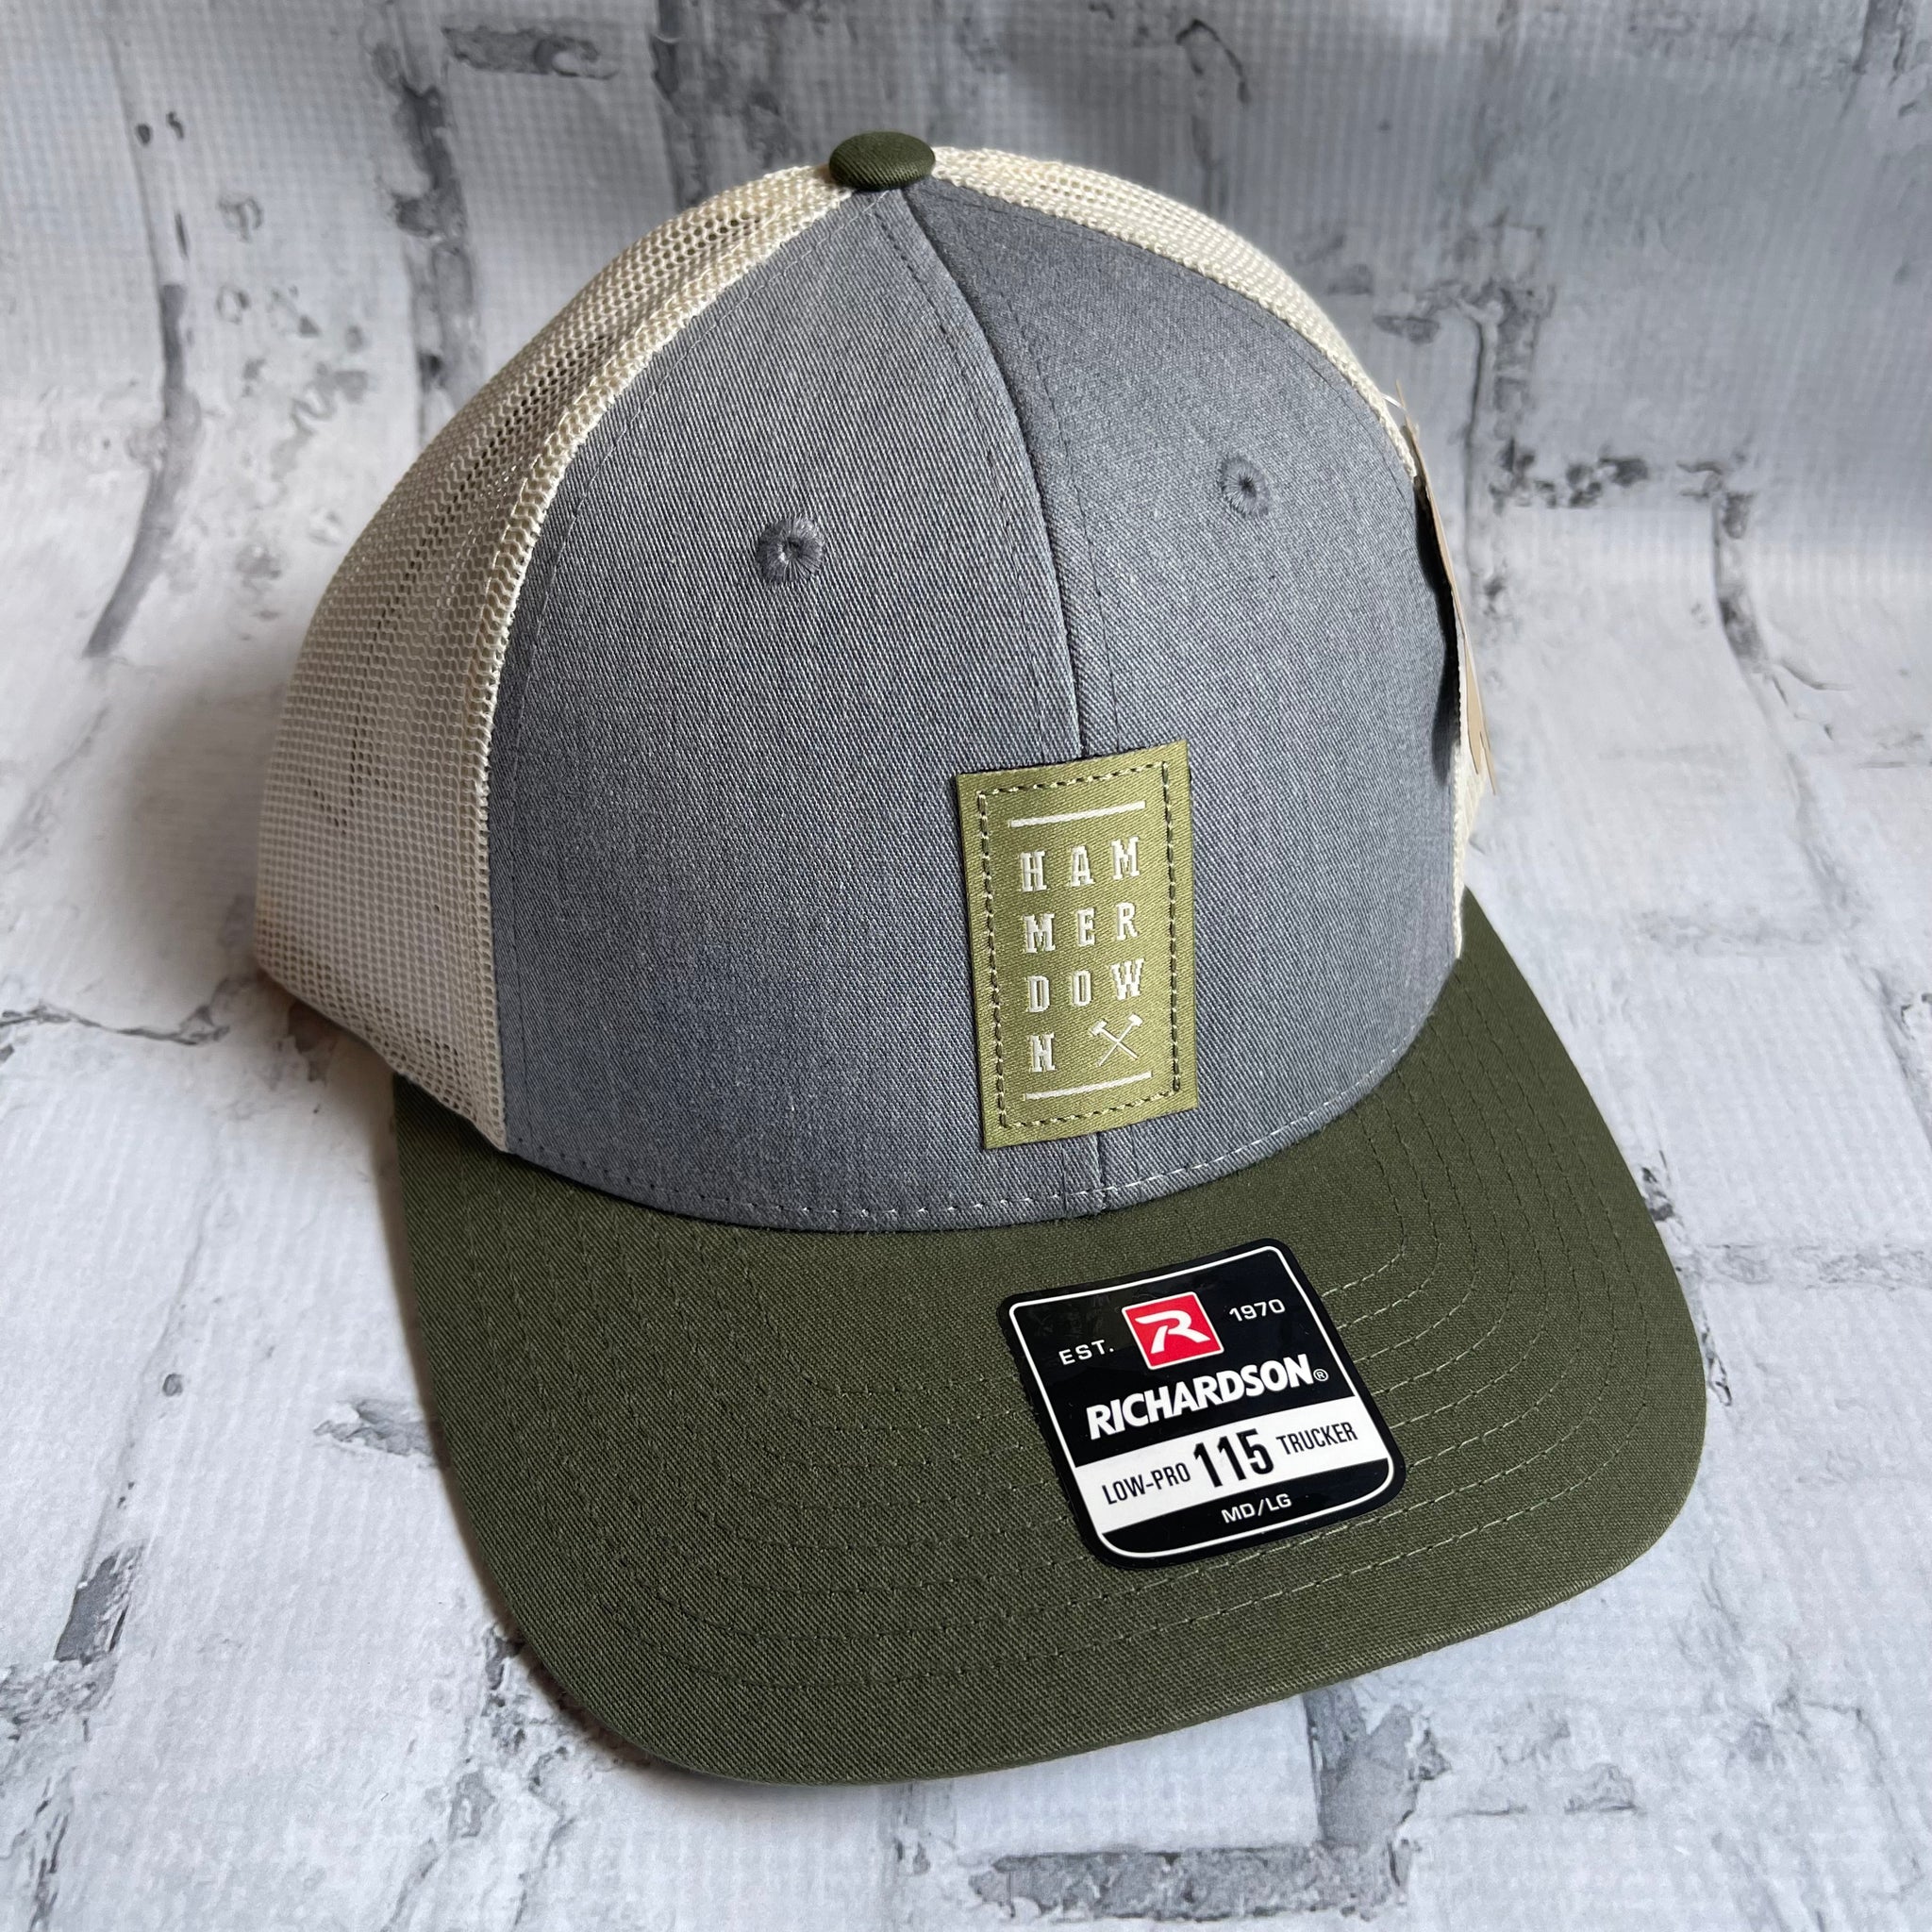 Hammer Down "Green HD Stacker" Hat - Heather Gray and Olive with Leather Patch - Southern Charm "Shop The Charm"